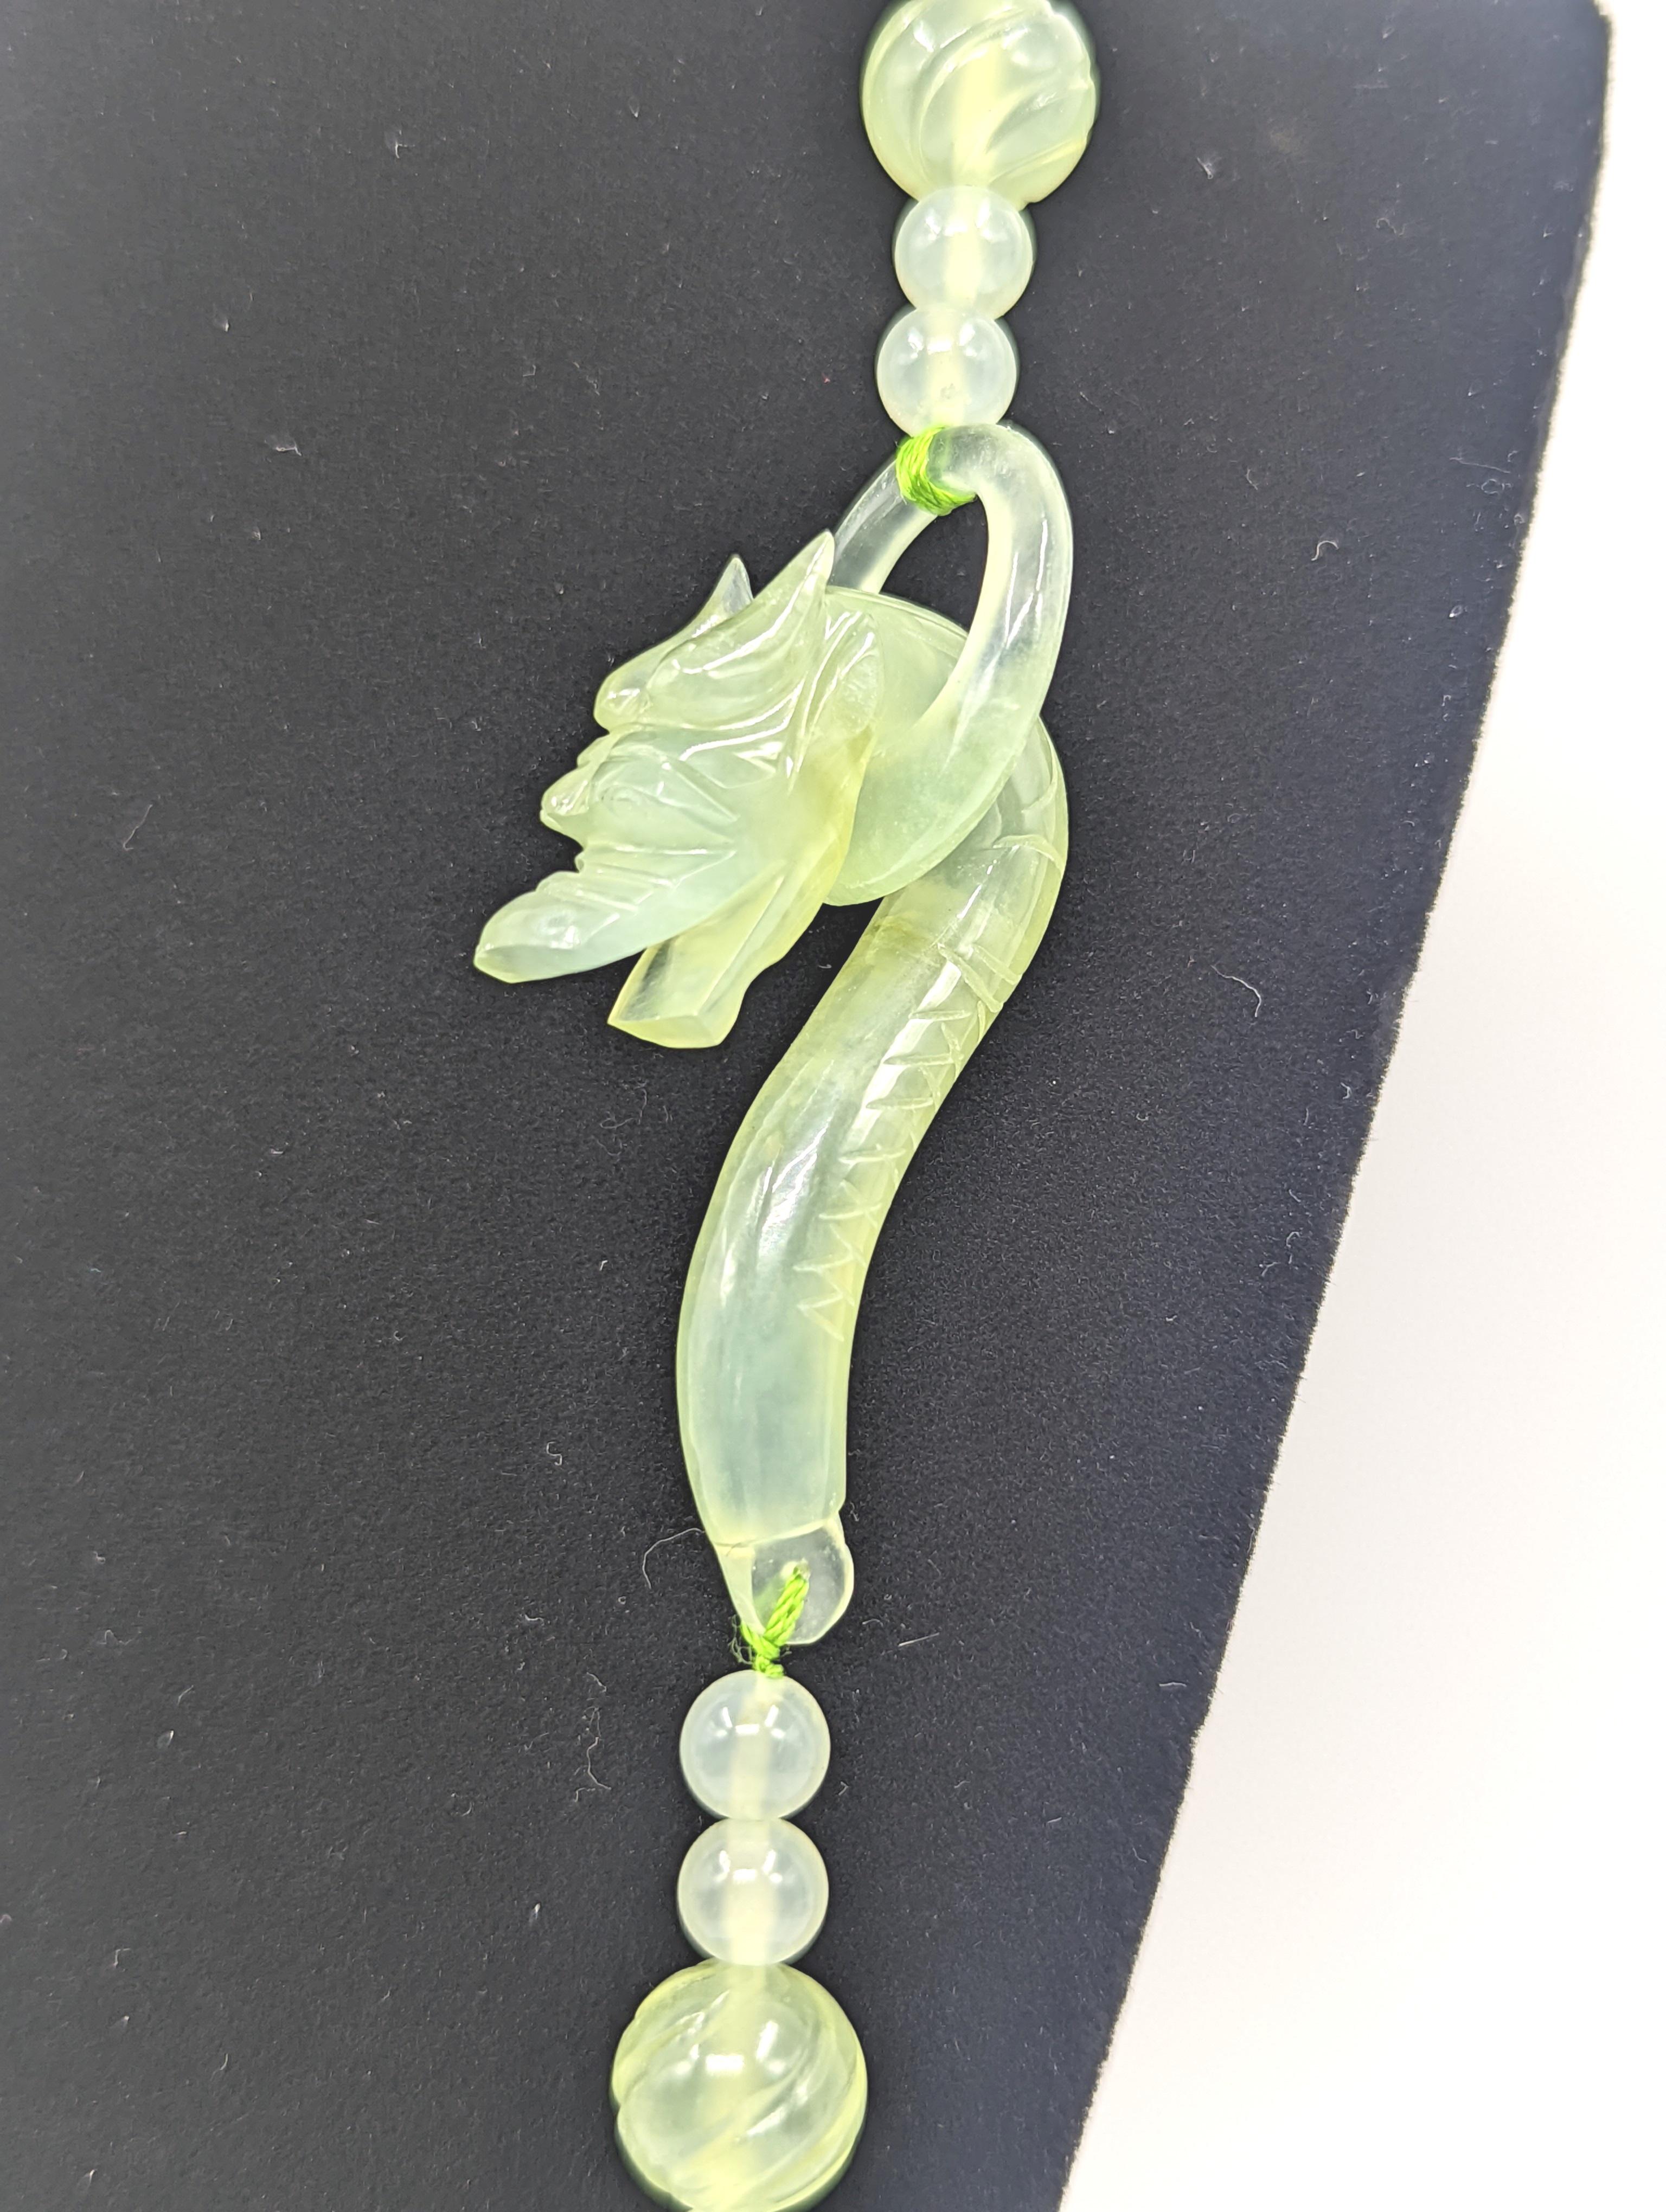 A vintage 1970s Chinese Arts & Crafts (H.K.) Ltd. carved 2 tone nephrite jade beaded necklace with carved dragon head clasp, highly translucent material, total length 29”.

Around since 1959, Chinese Arts and Crafts is where Hillary Clinton and